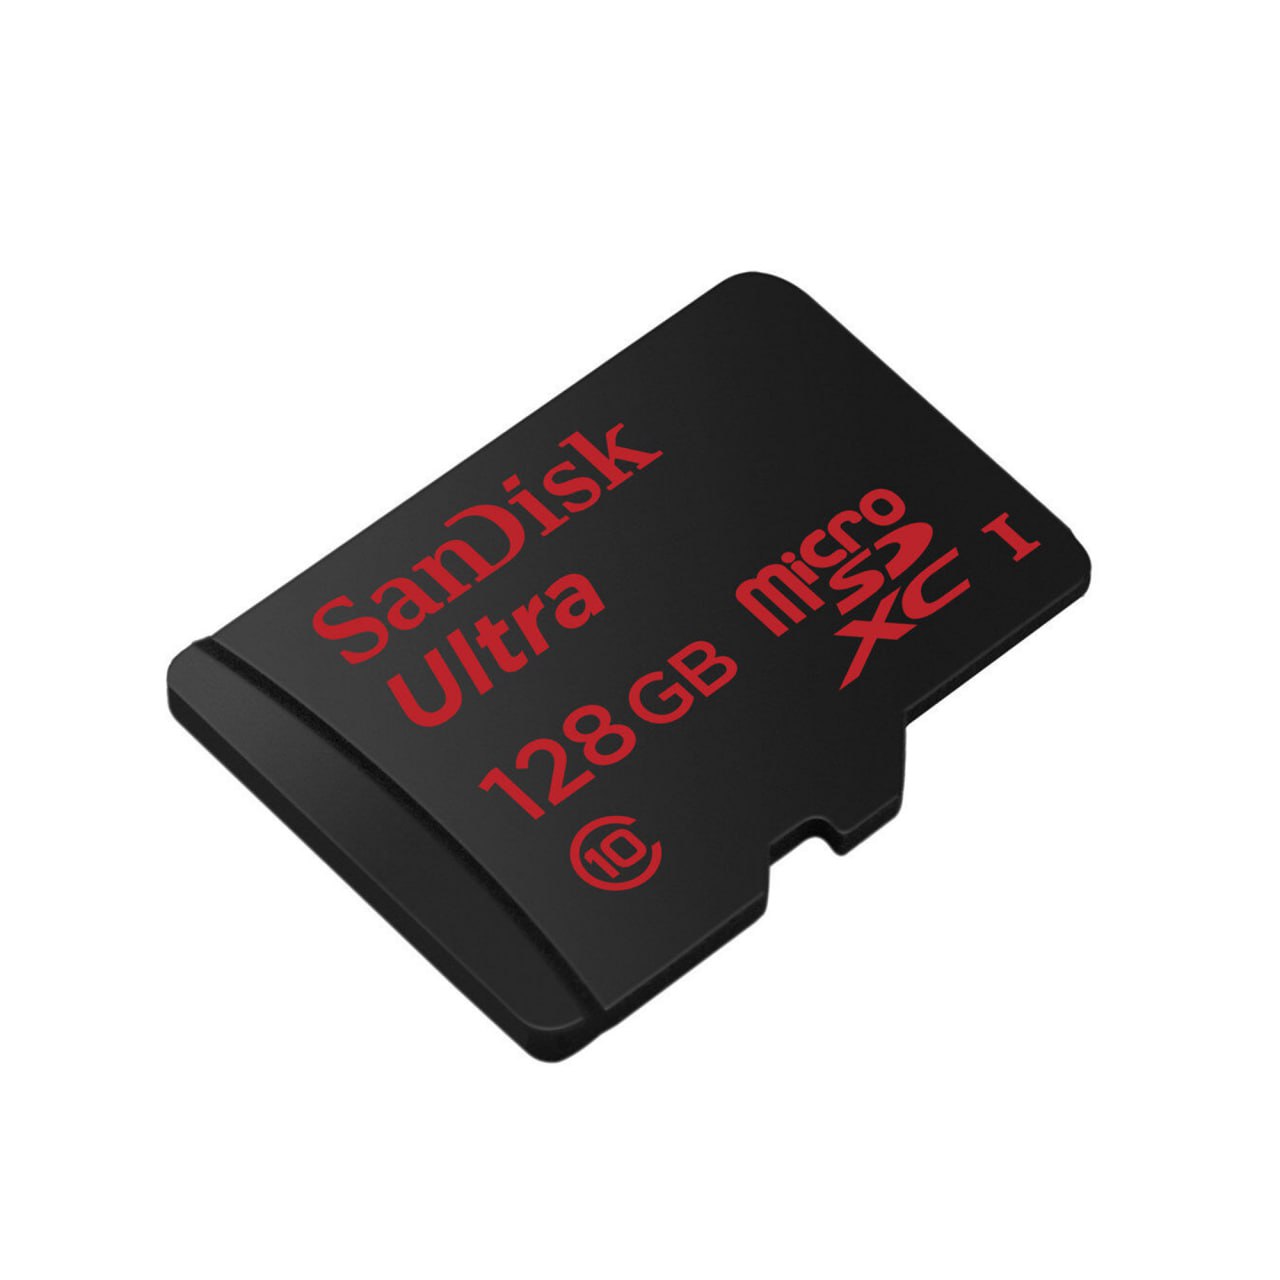 SanDisk 32GB Ultra microSDHC UHS-I/Class 10 Memory Card, Speed Up to 80MB/s  (SDSQUNS-032G) 